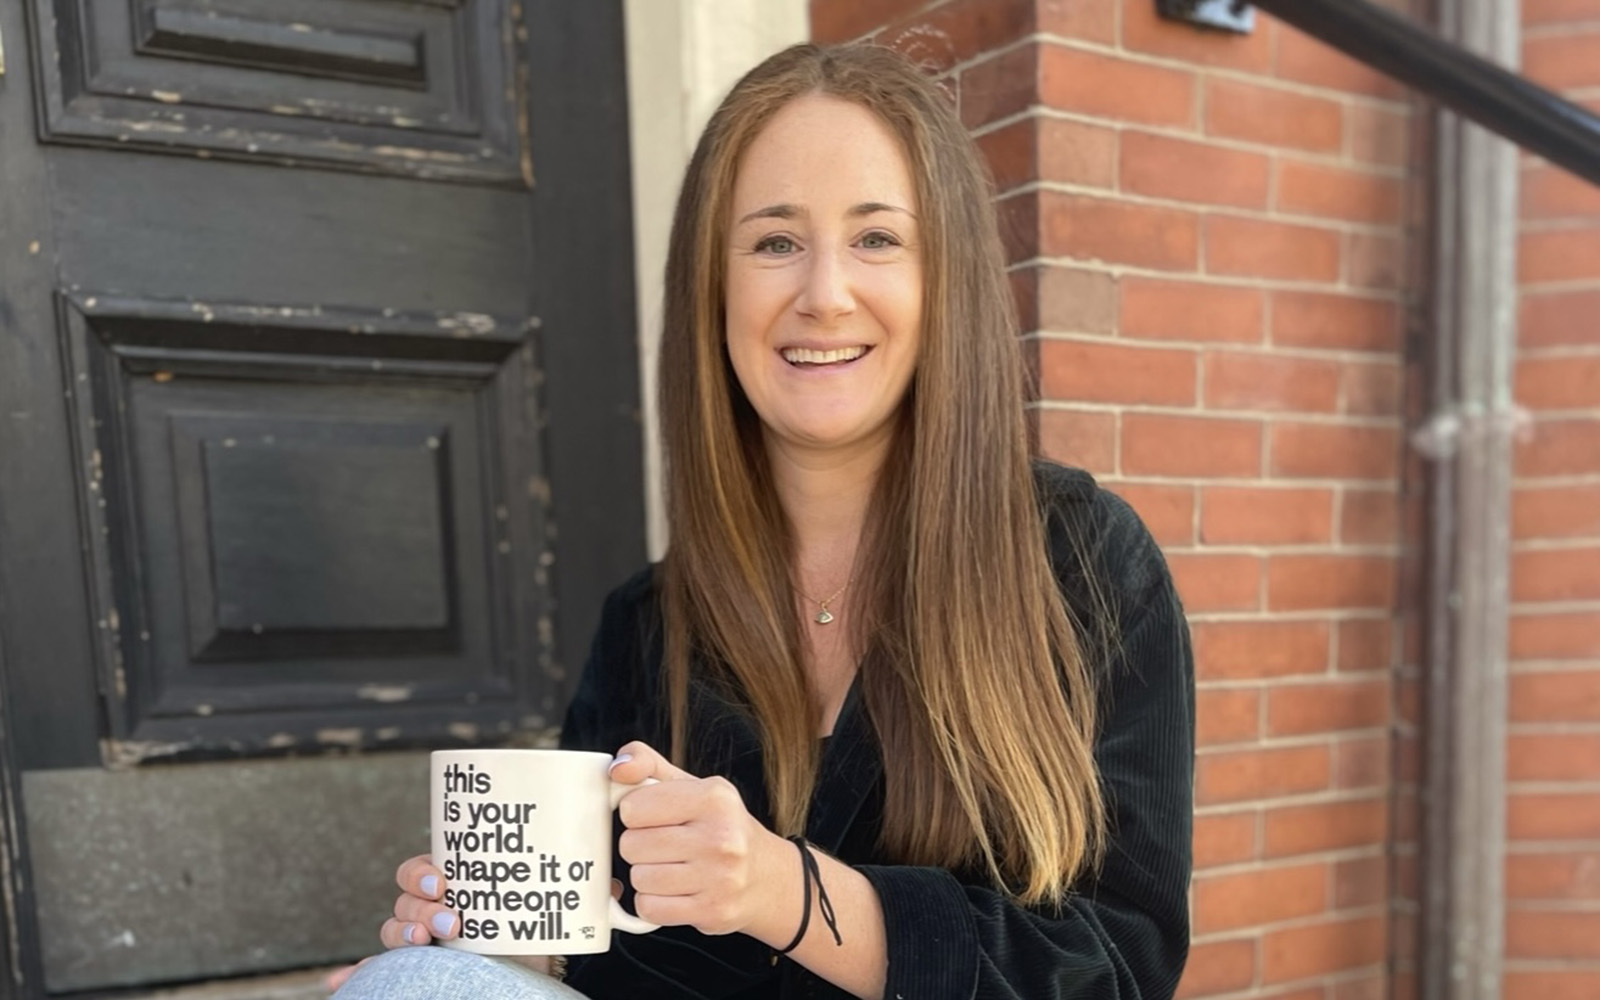 UConn School of Business alumna and entrepreneur Michelle Wax '14 poses on a stoop with a coffee mug